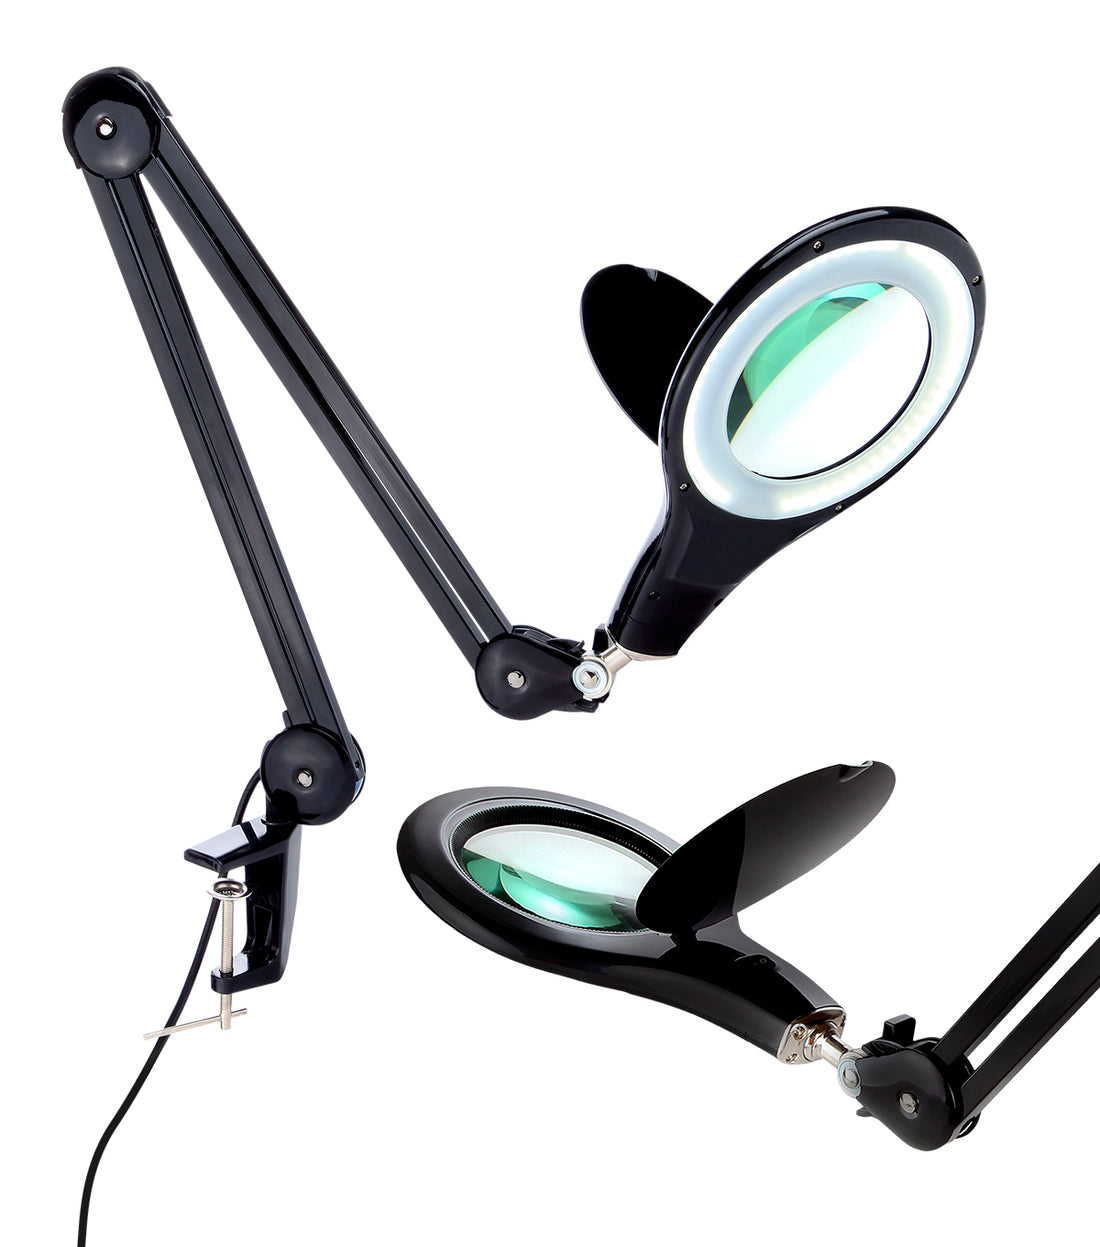 Brightech LightView PRO - Comfortable LED Magnifying Glass Desk Lamp for Close Work - Bright 2.25x Magnifier Lighted Lens - Puzzle, Craft & Reading Light for Table Top Tasks